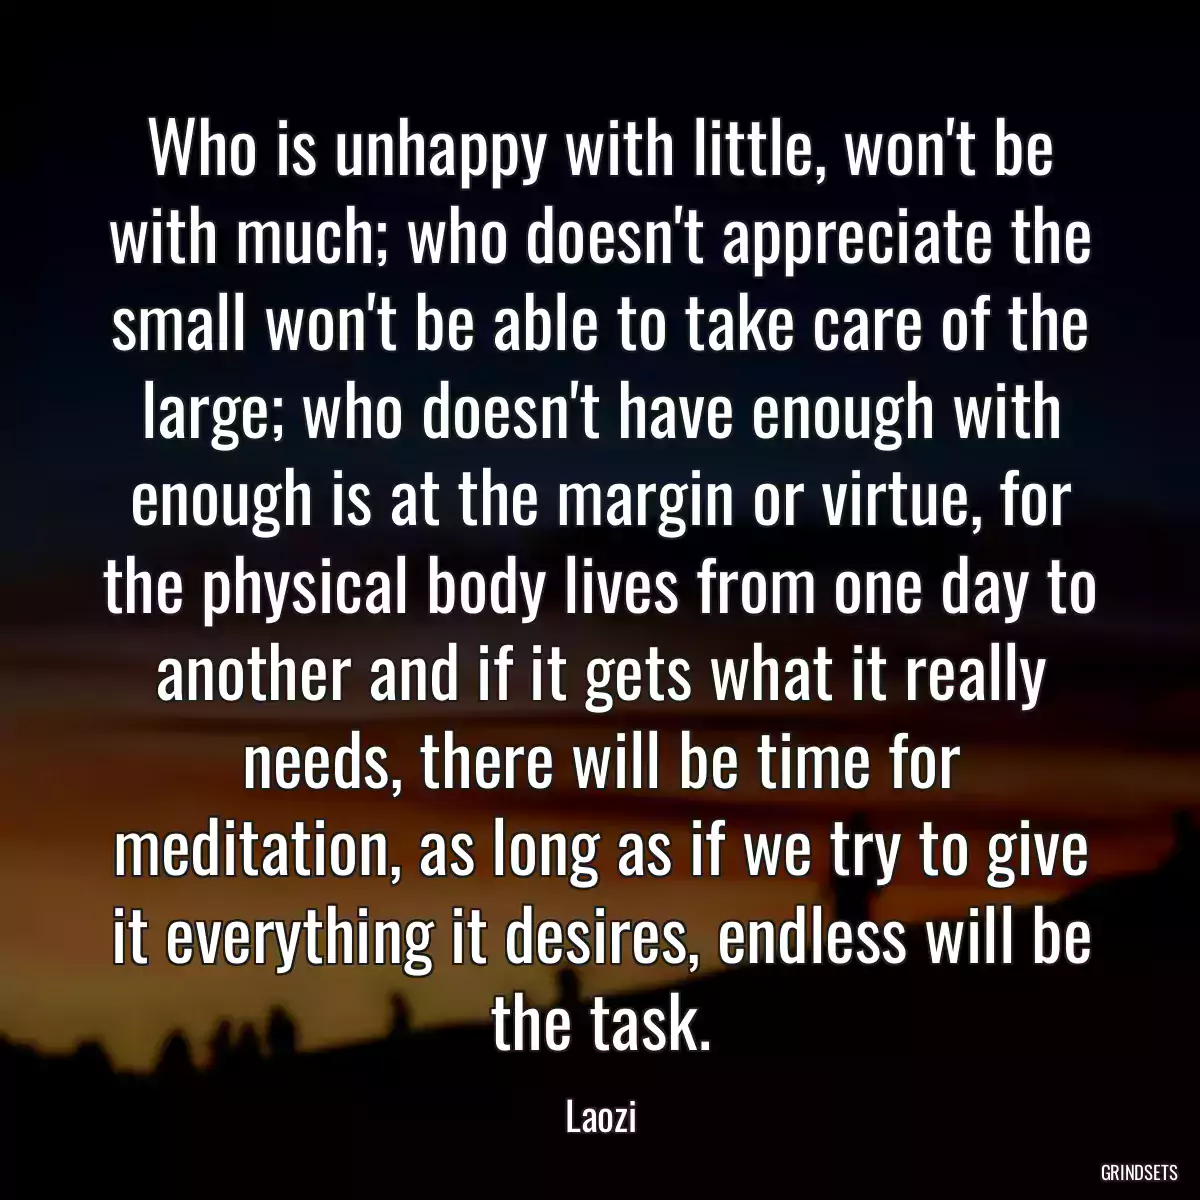 Who is unhappy with little, won\'t be with much; who doesn\'t appreciate the small won\'t be able to take care of the large; who doesn\'t have enough with enough is at the margin or virtue, for the physical body lives from one day to another and if it gets what it really needs, there will be time for meditation, as long as if we try to give it everything it desires, endless will be the task.